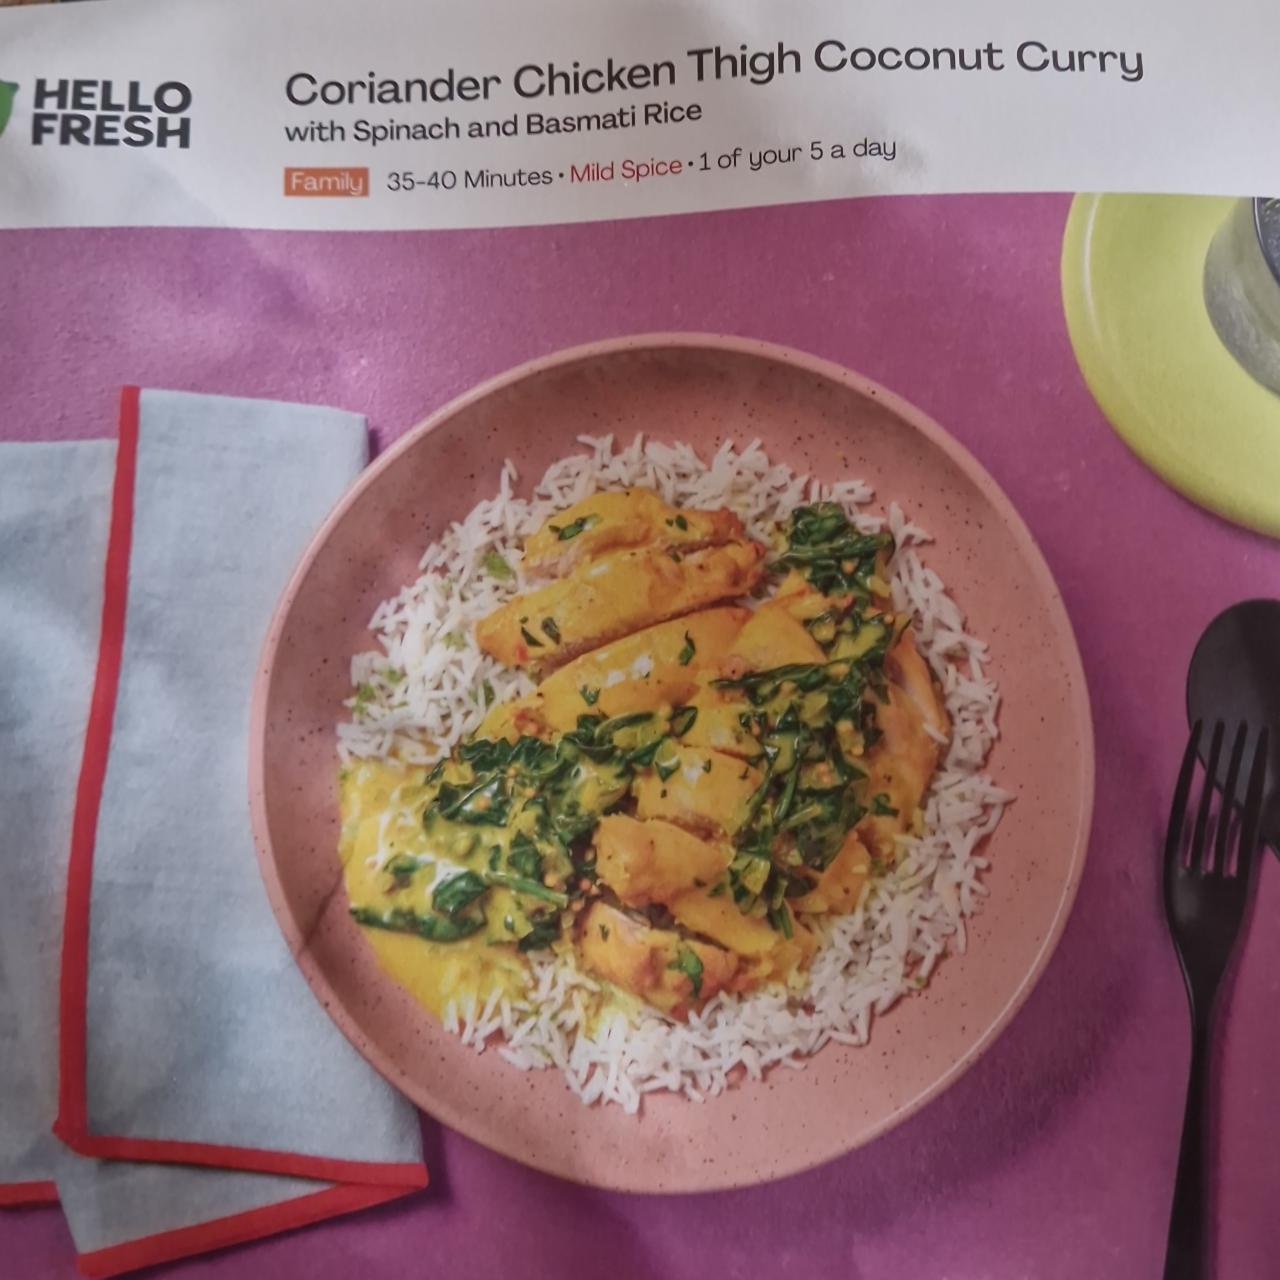 Fotografie - Coriander Chicken Thigh Coconut Curry with Spinach and Basmati Rice Hello Fresh